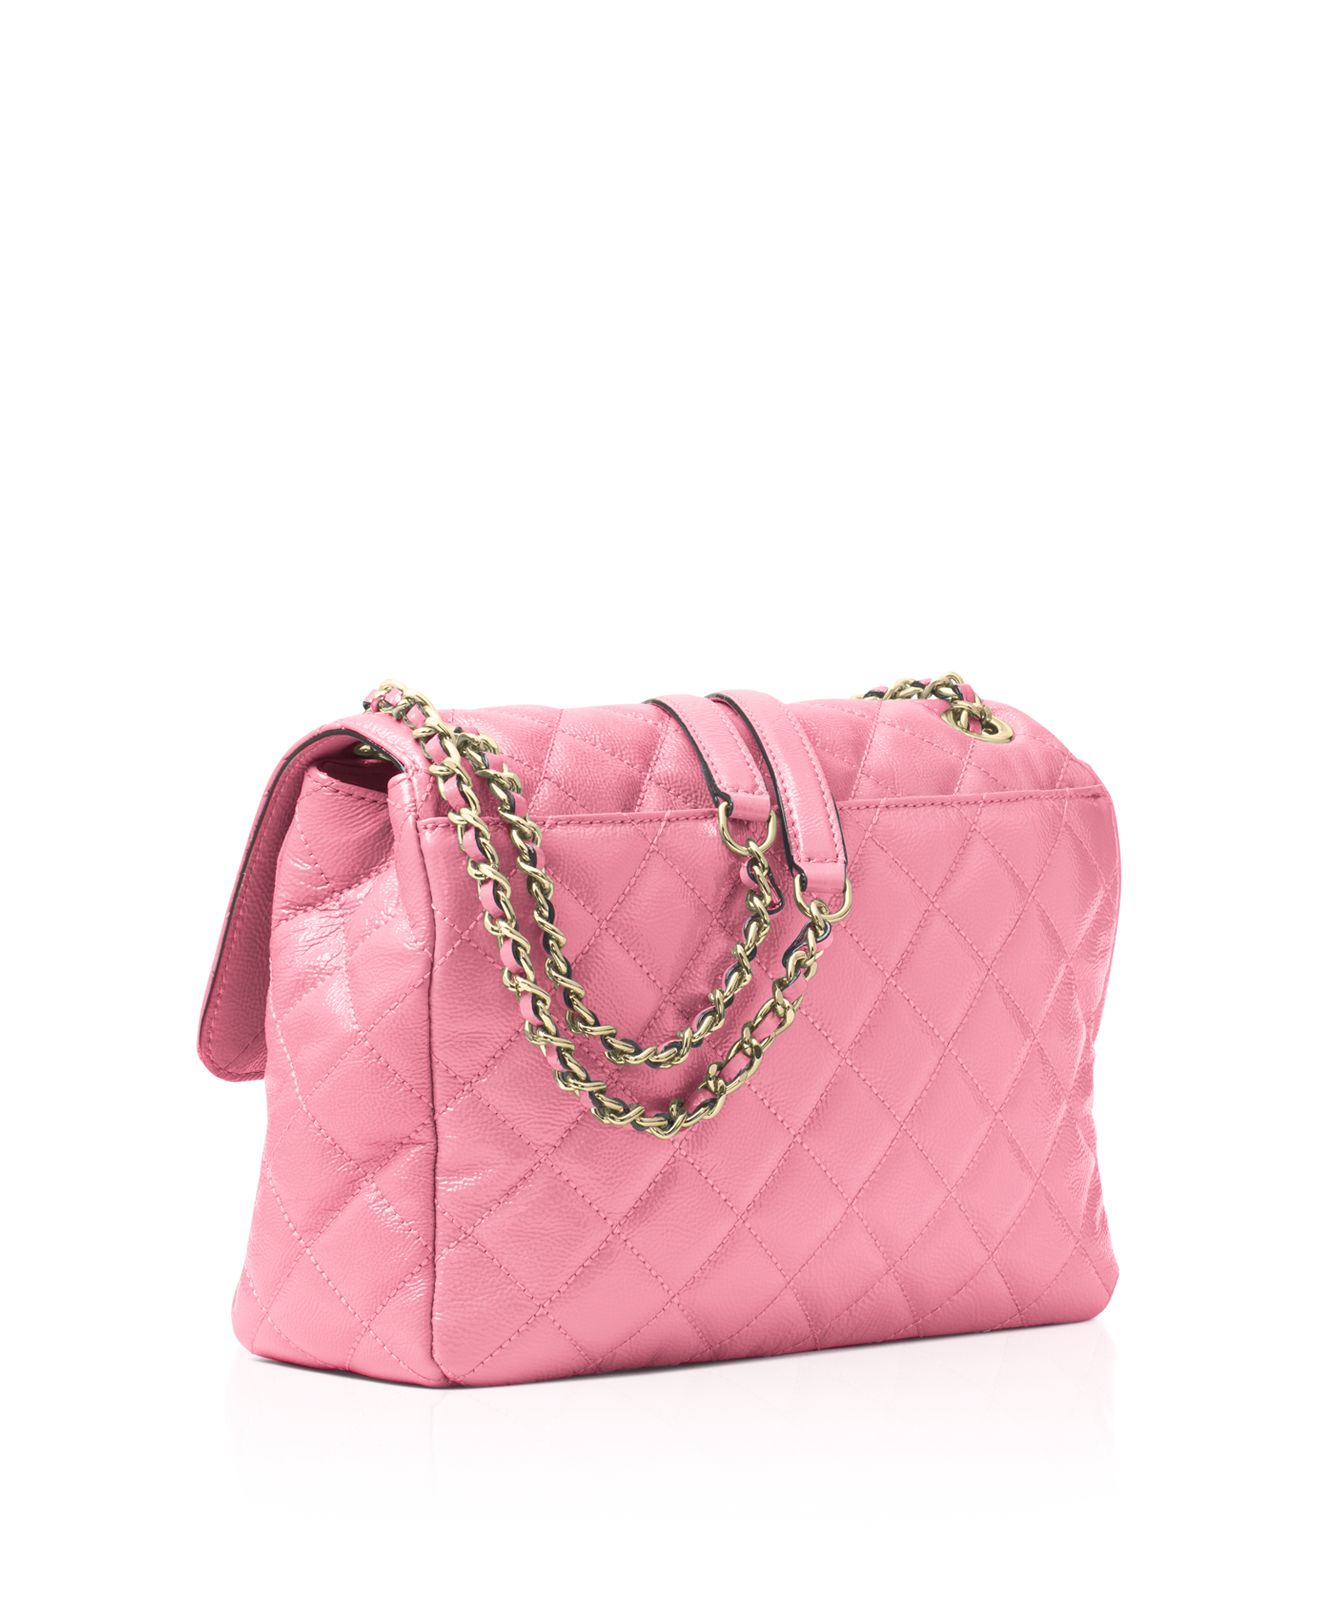 MICHAEL Michael Kors Leather Extra Large Sloan Chain Shoulder Bag in Pink - Lyst